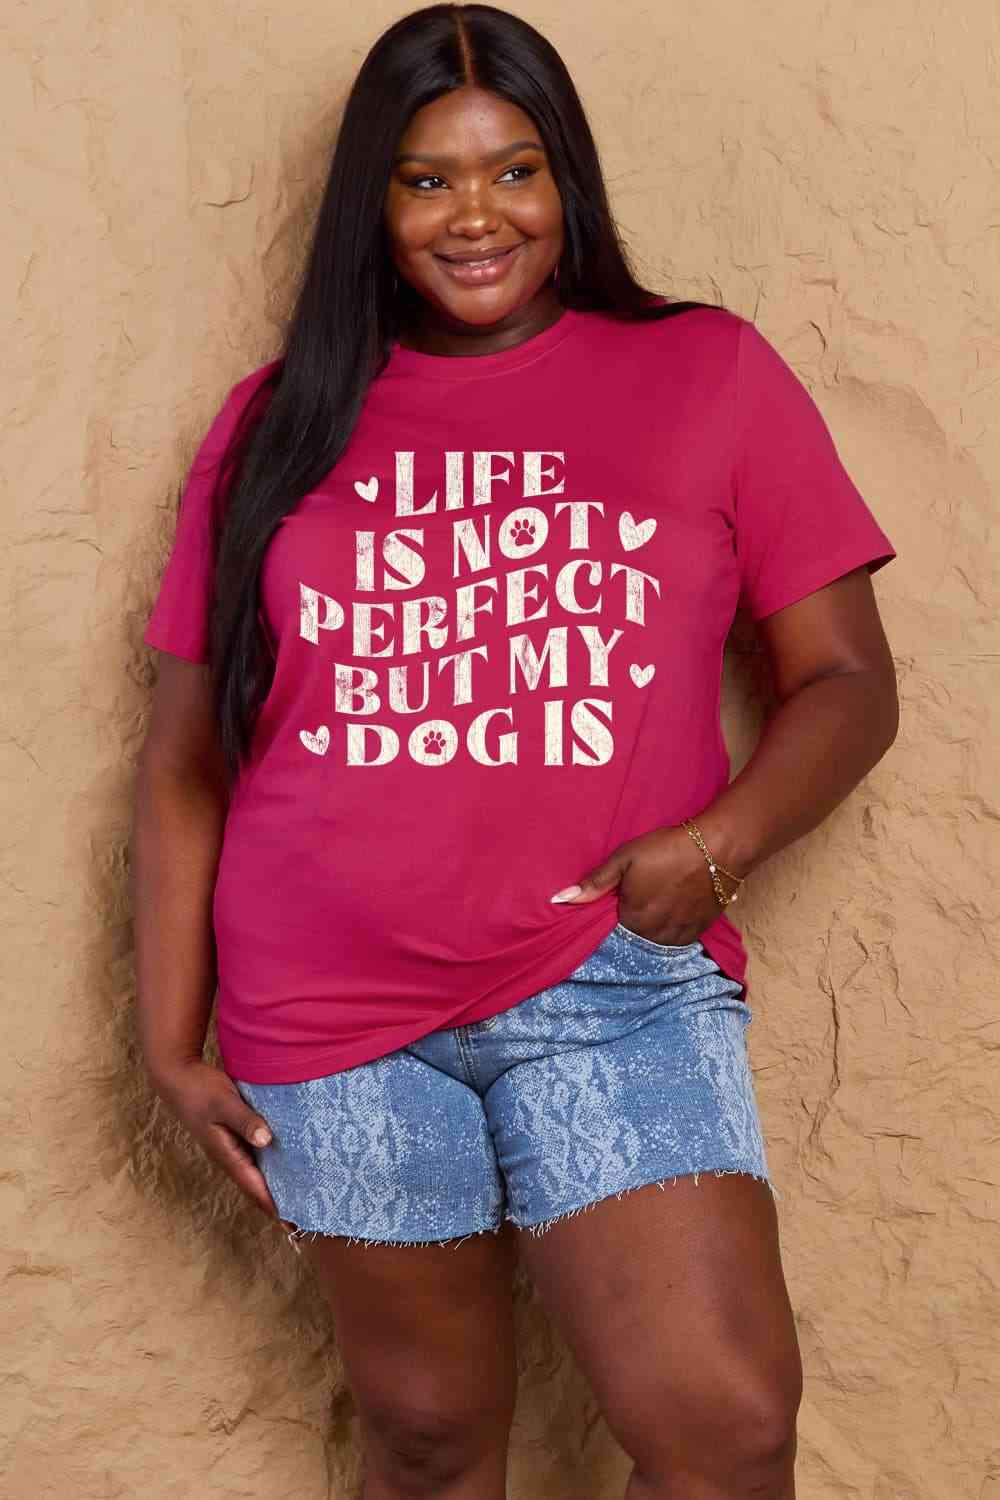 Simply Love Full Size Dog Slogan Graphic Cotton T-Shirt